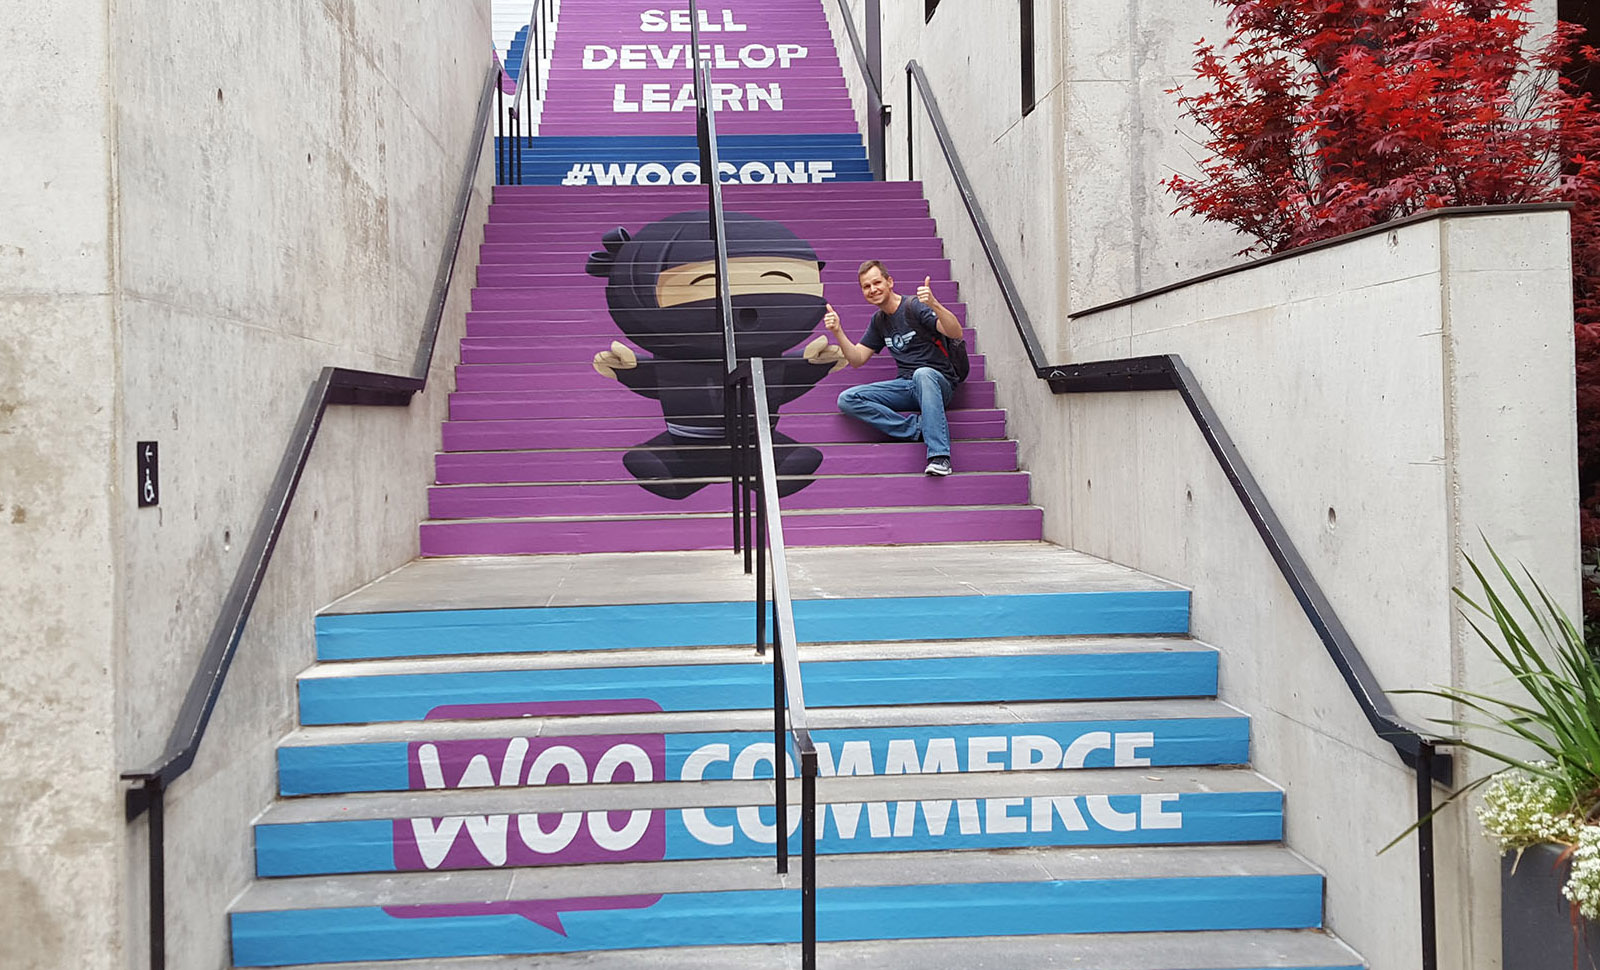 Jim at WooCommerce Conference